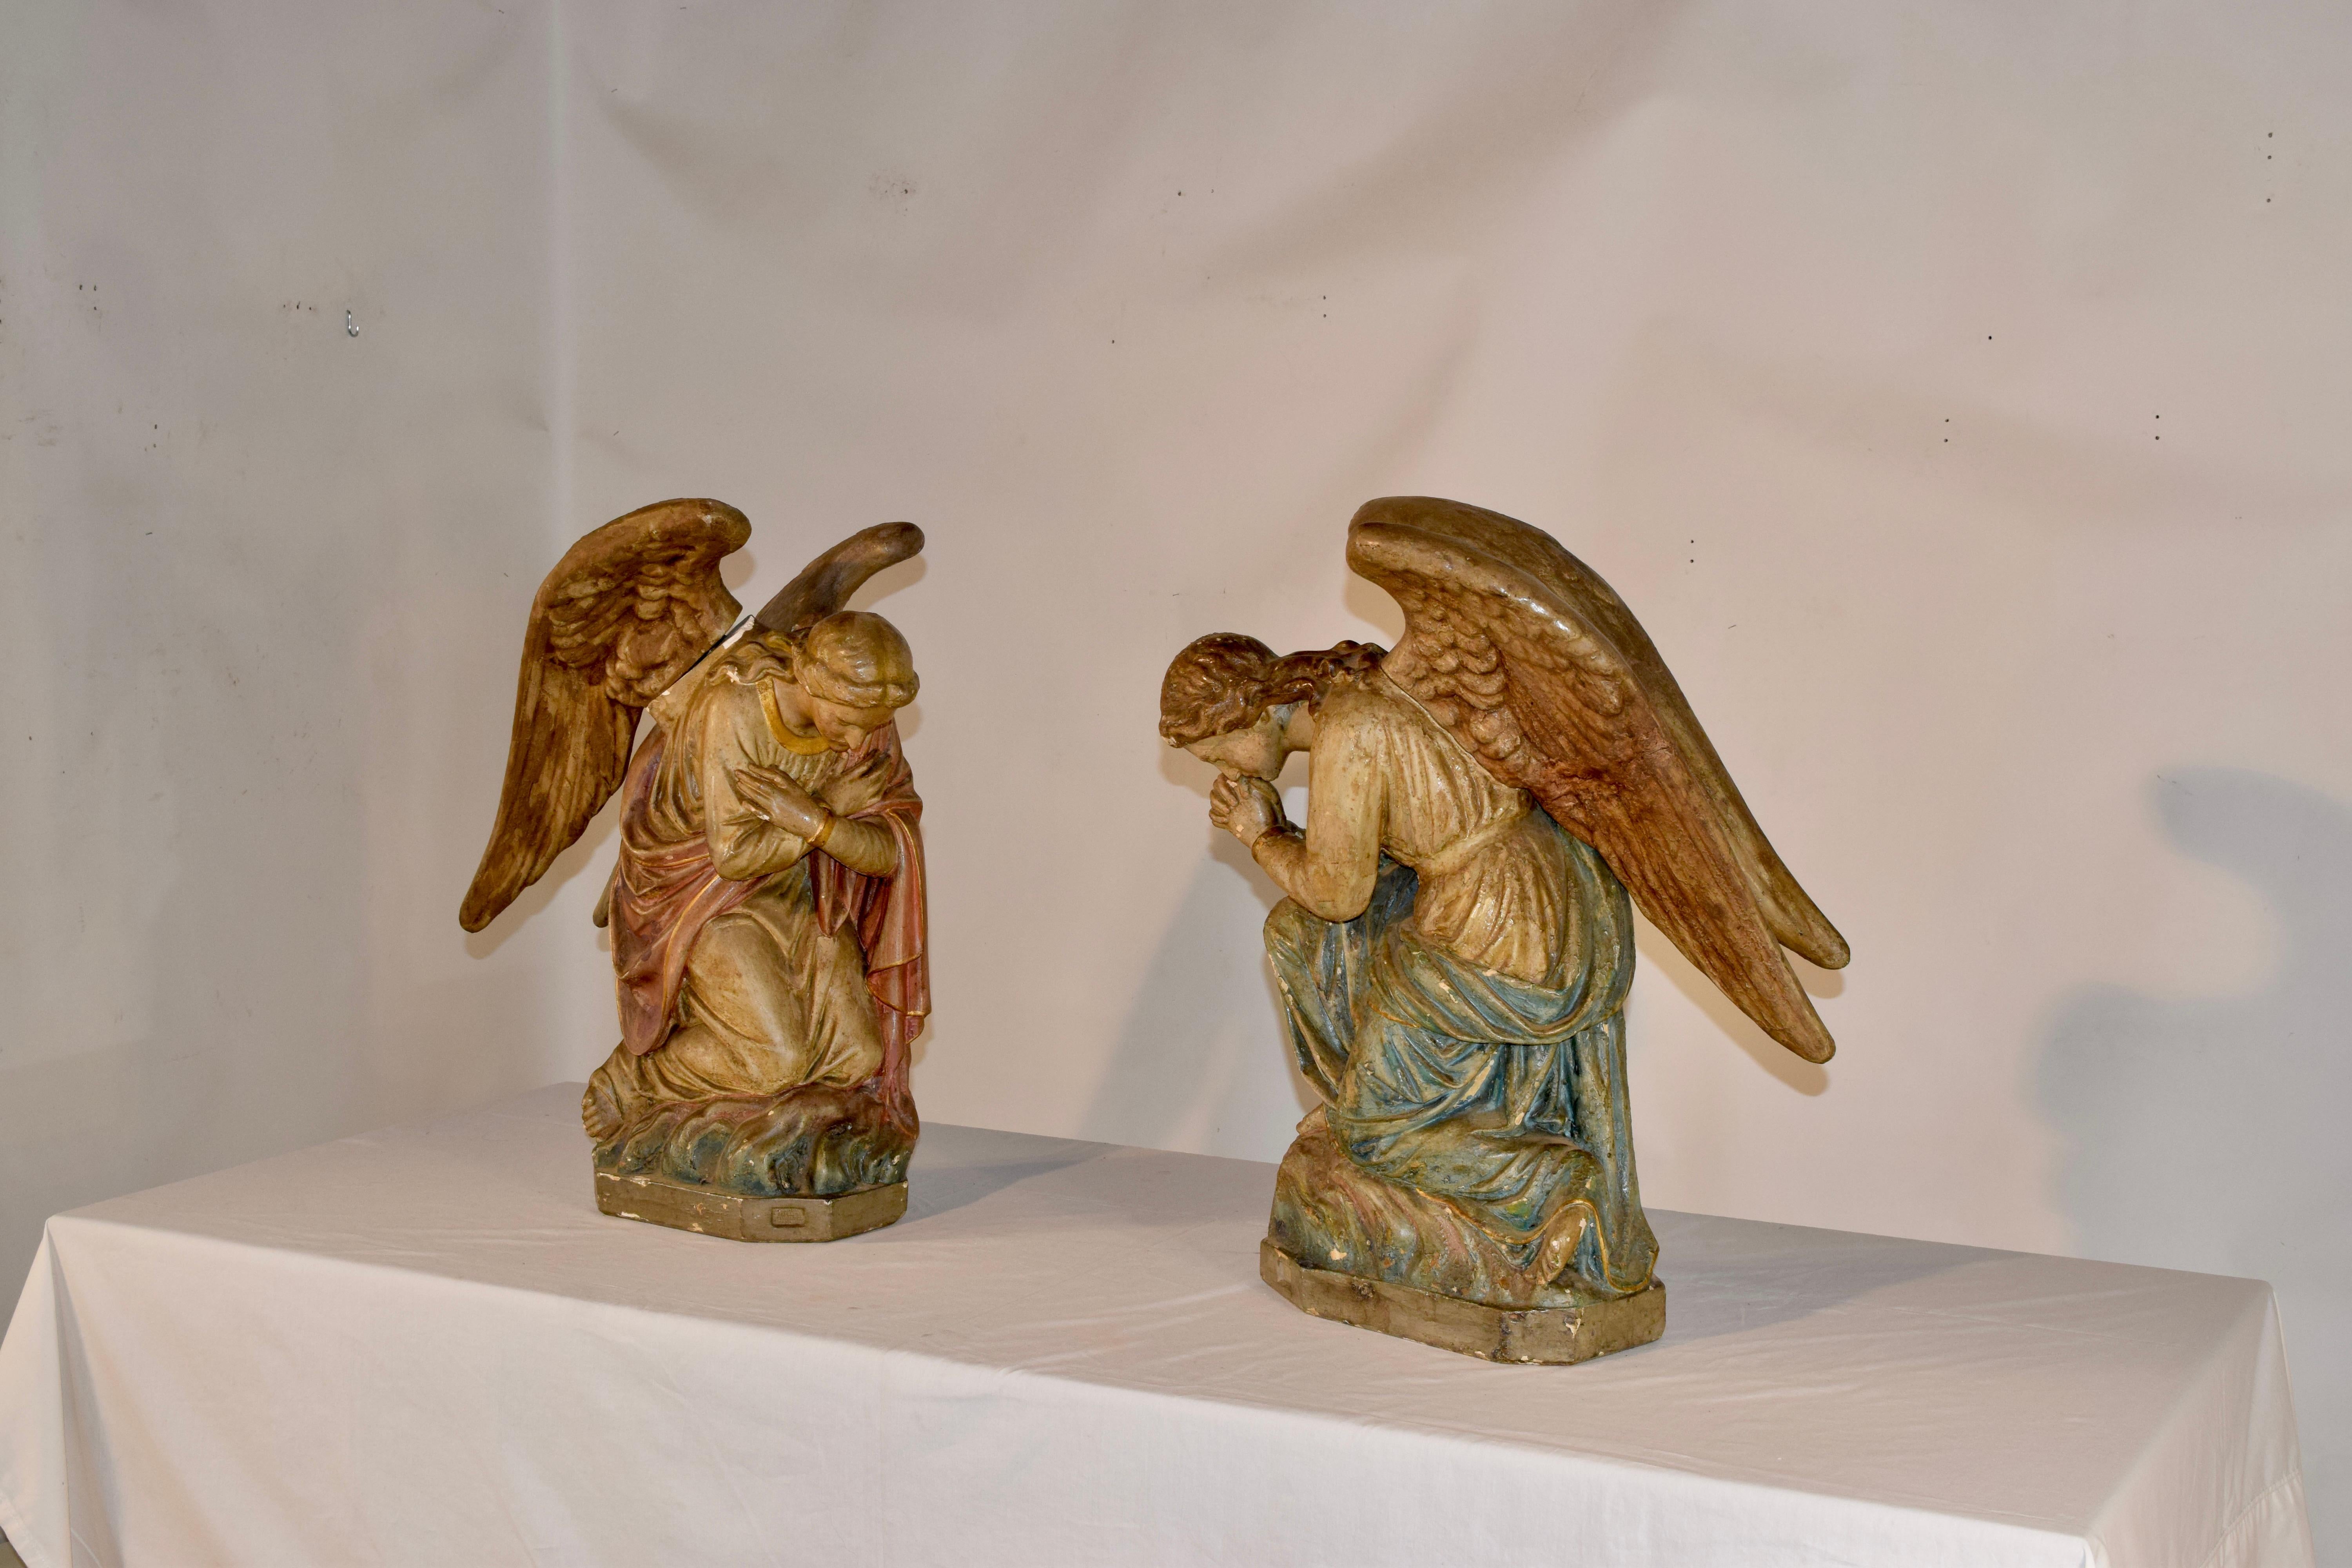 These stunning angel sculptures are sold as a pair. They were originally placed on an church altar, with one facing left and the other facing right. With their detailed facial features and sweeping wings, they are truly captivating works of art.